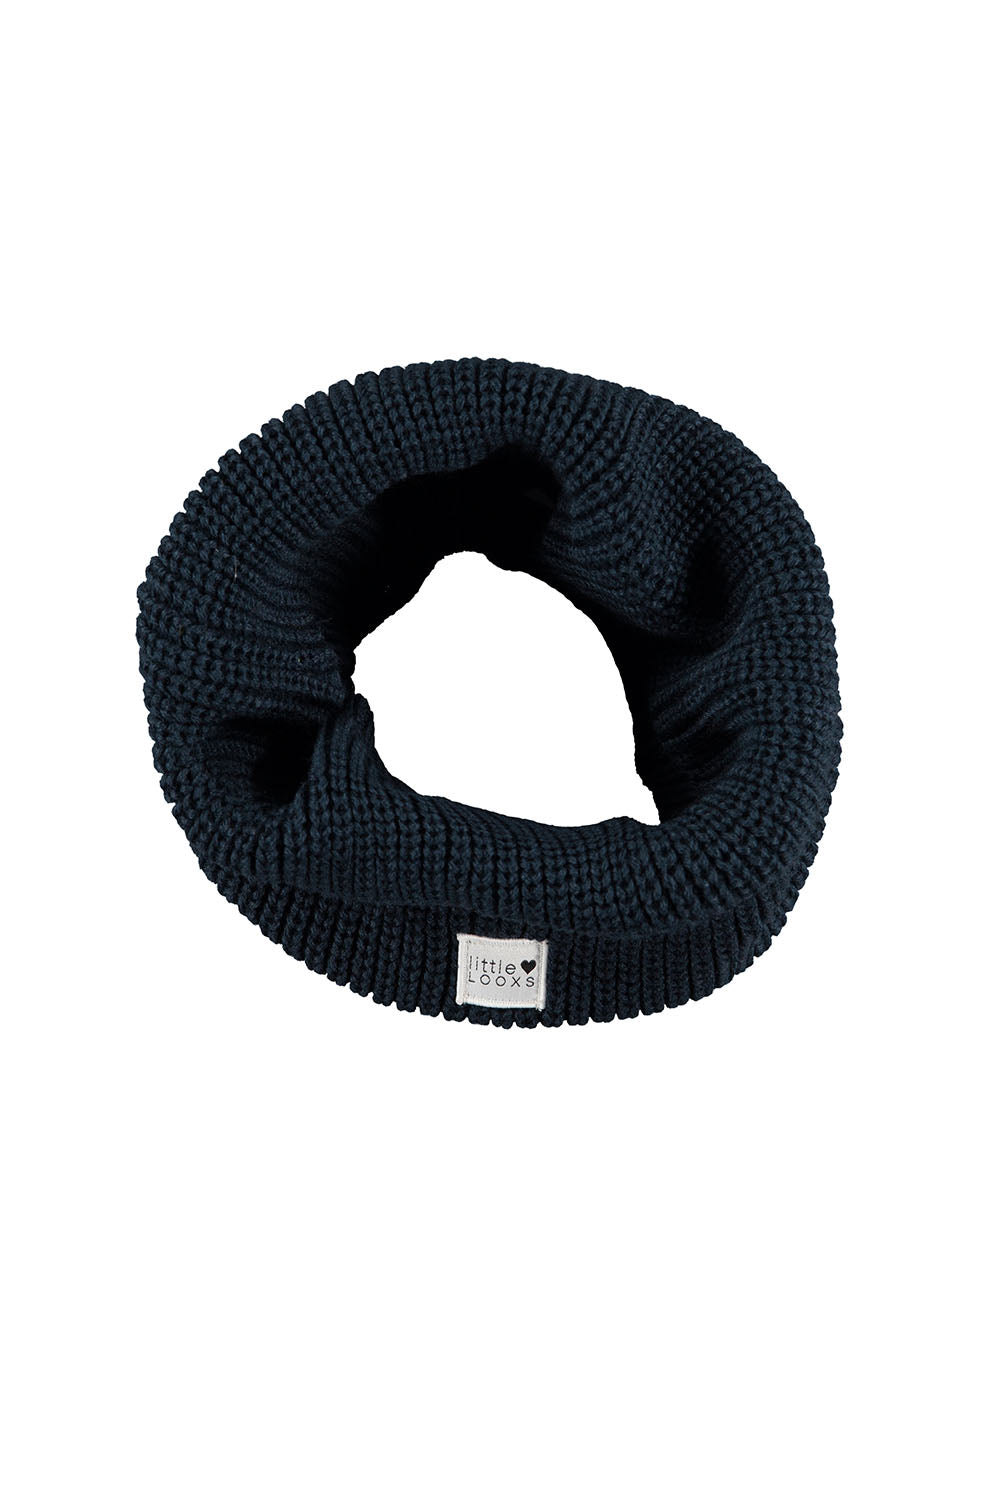 LOOXS Little Little knitted collar scarf